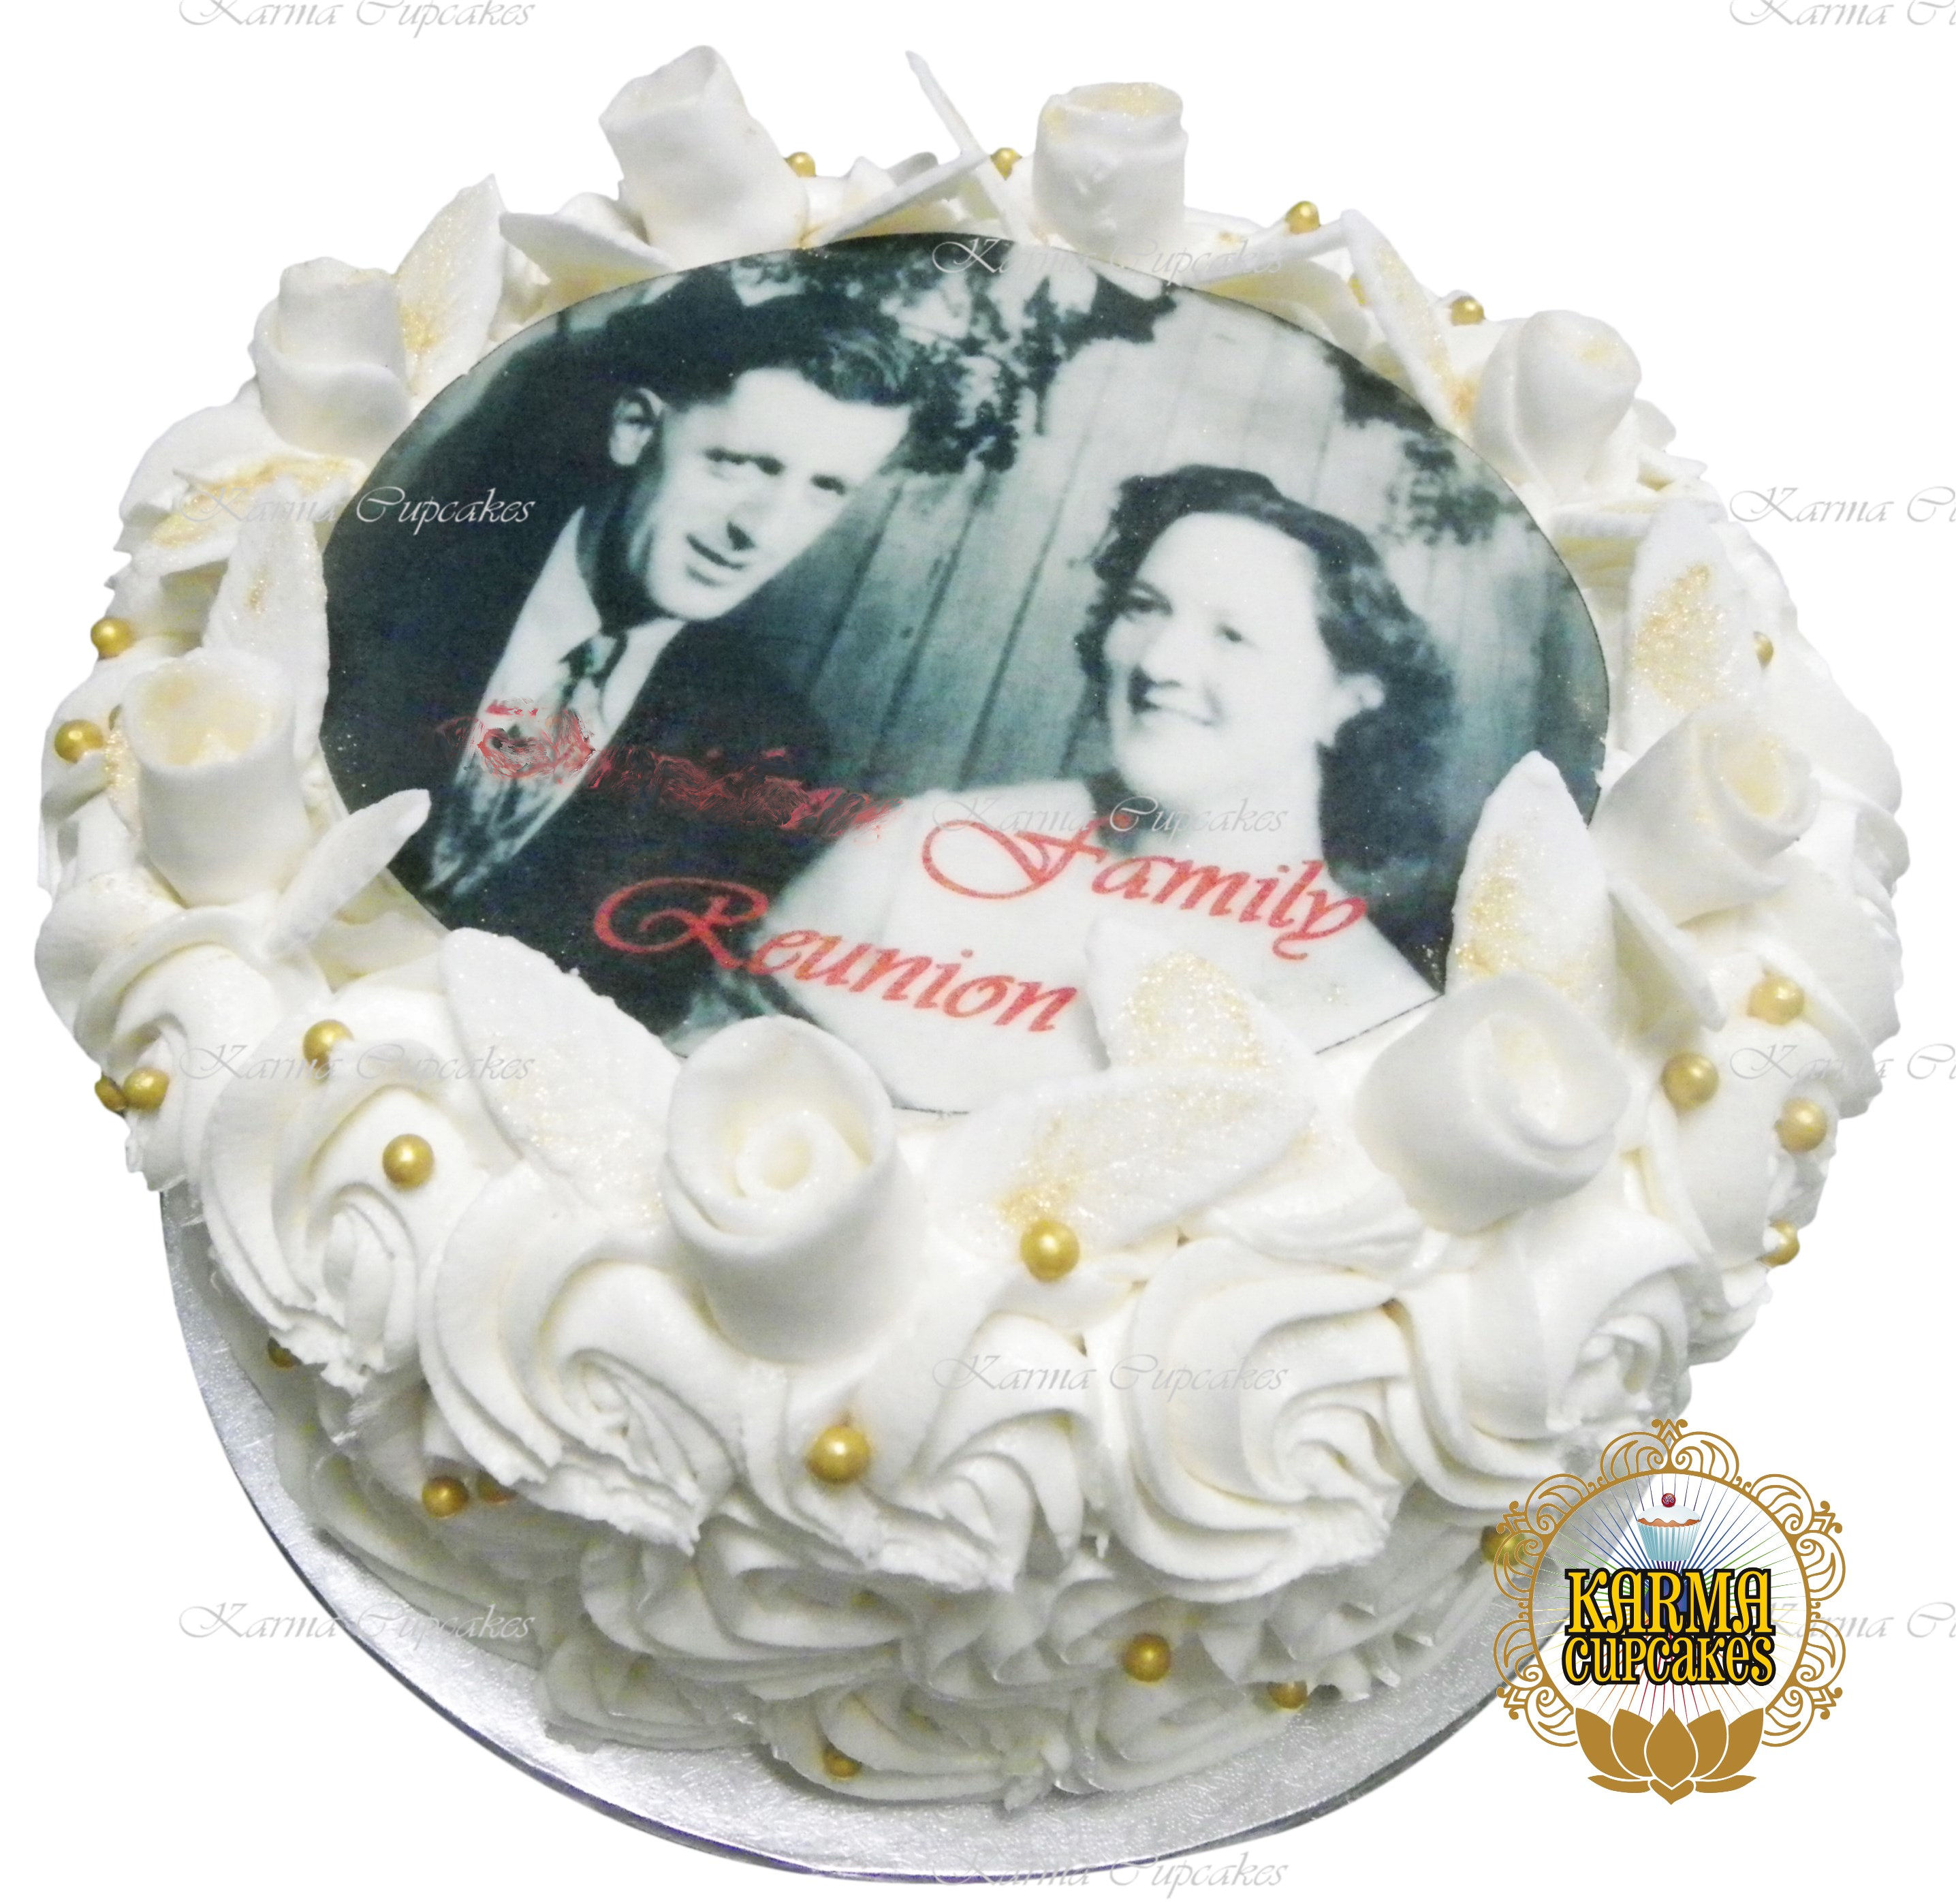 Family Reunion Cake with Edible Image